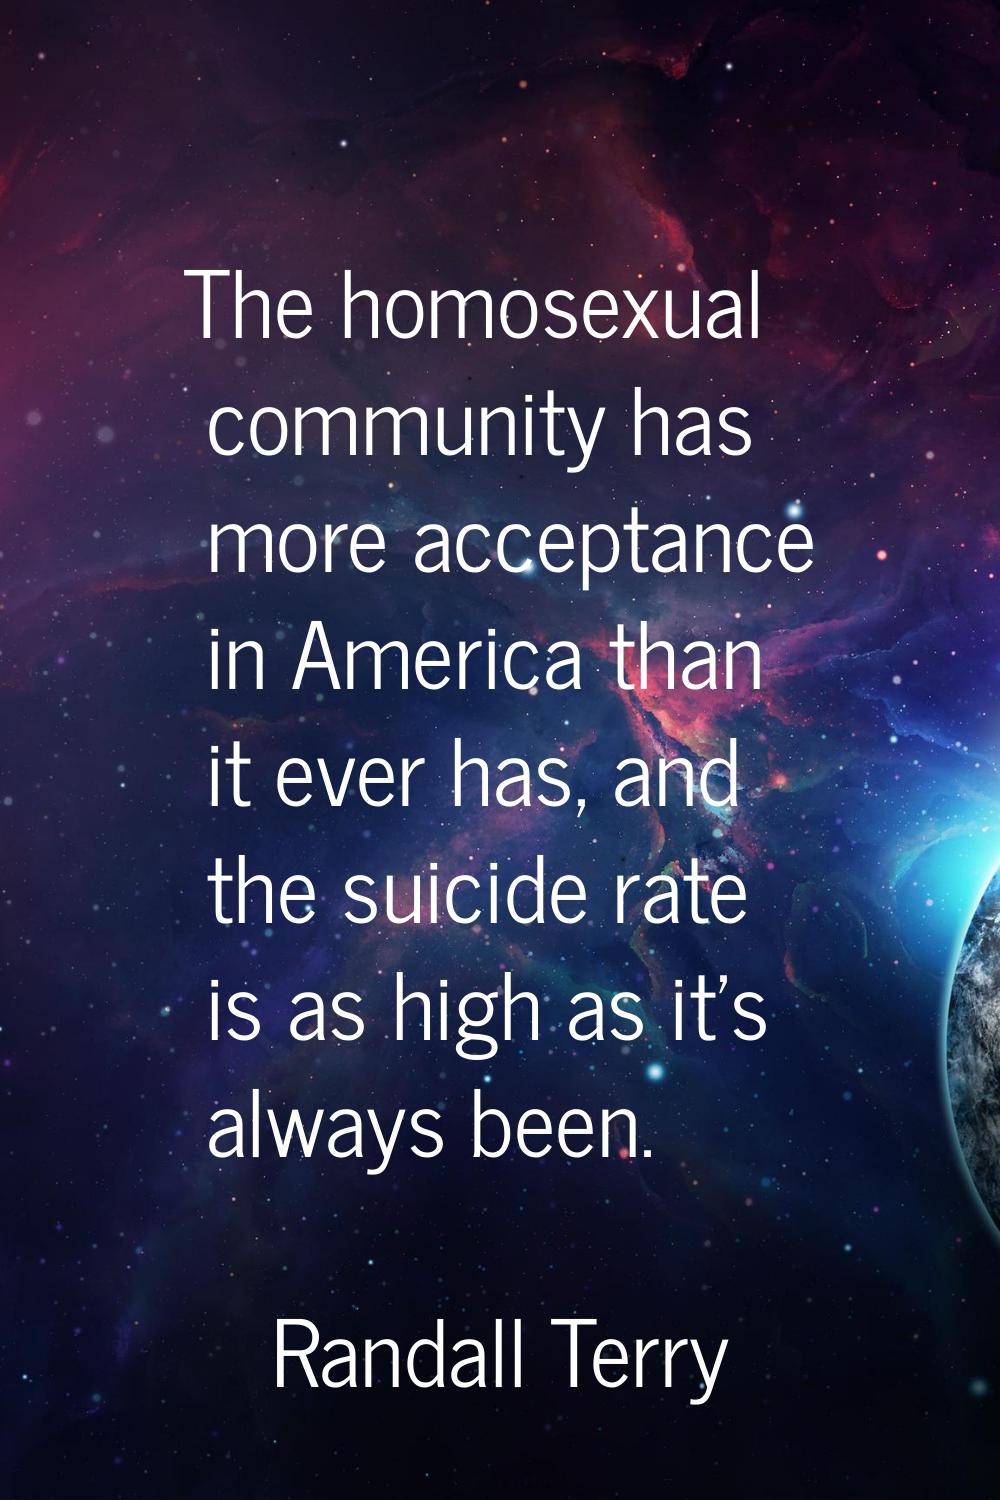 The homosexual community has more acceptance in America than it ever has, and the suicide rate is a